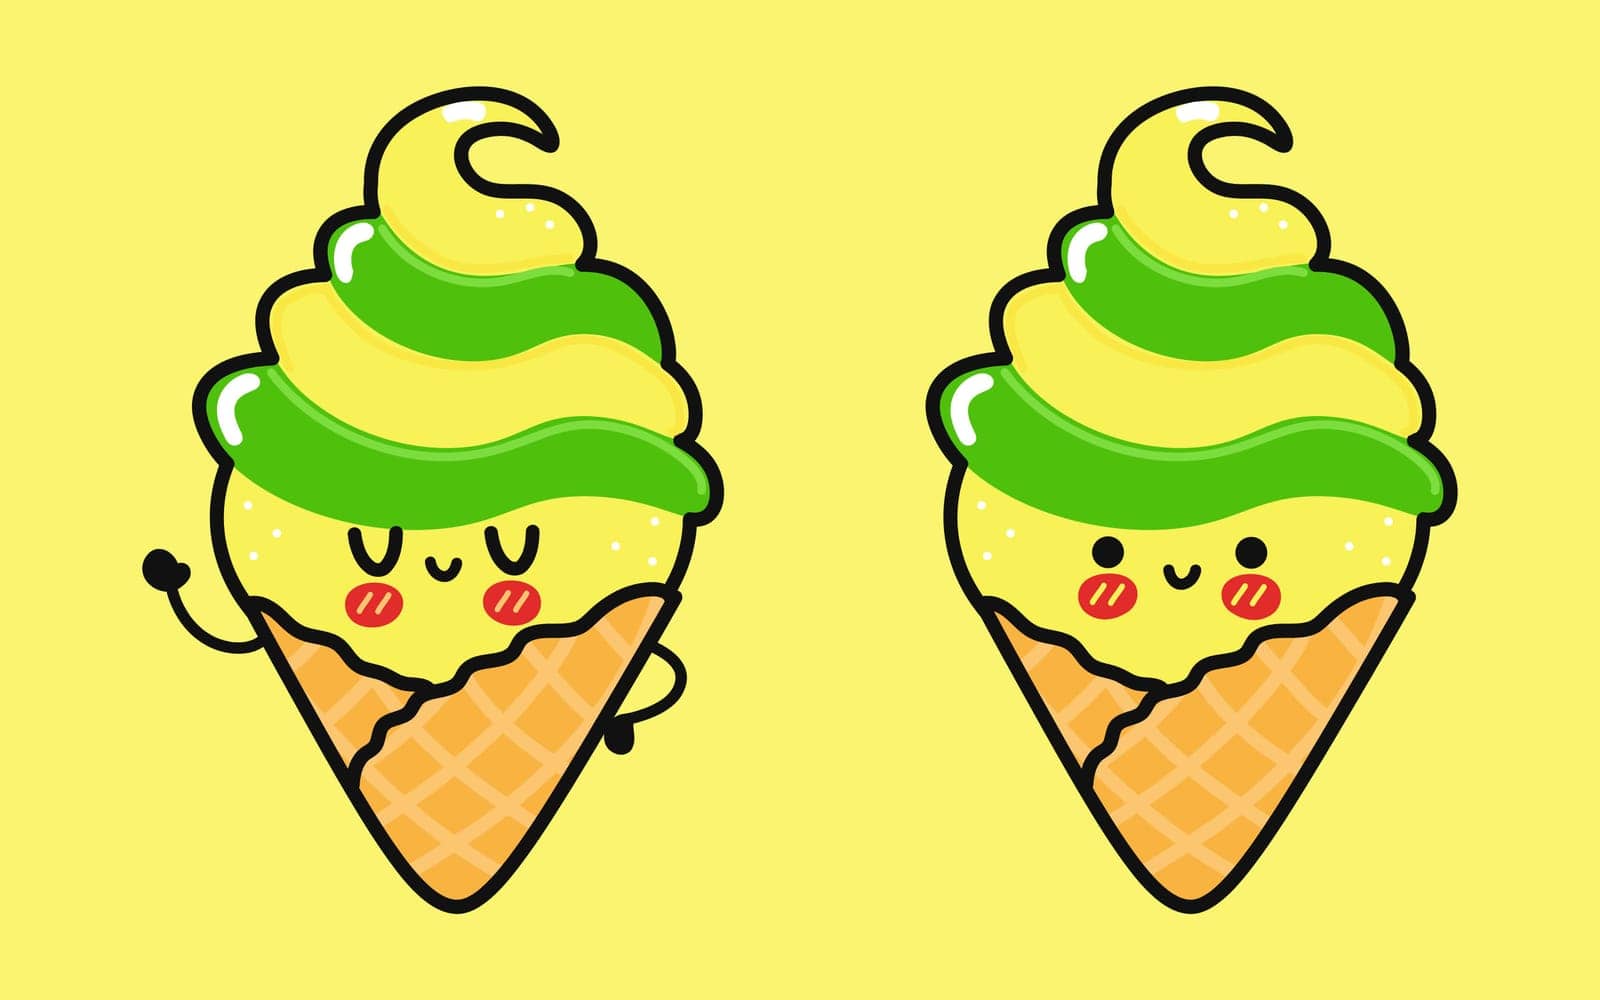 Cute funny Ice cream. Vector hand drawn cartoon kawaii character illustration icon. Isolated on yellow background. Happy Ice cream character concept